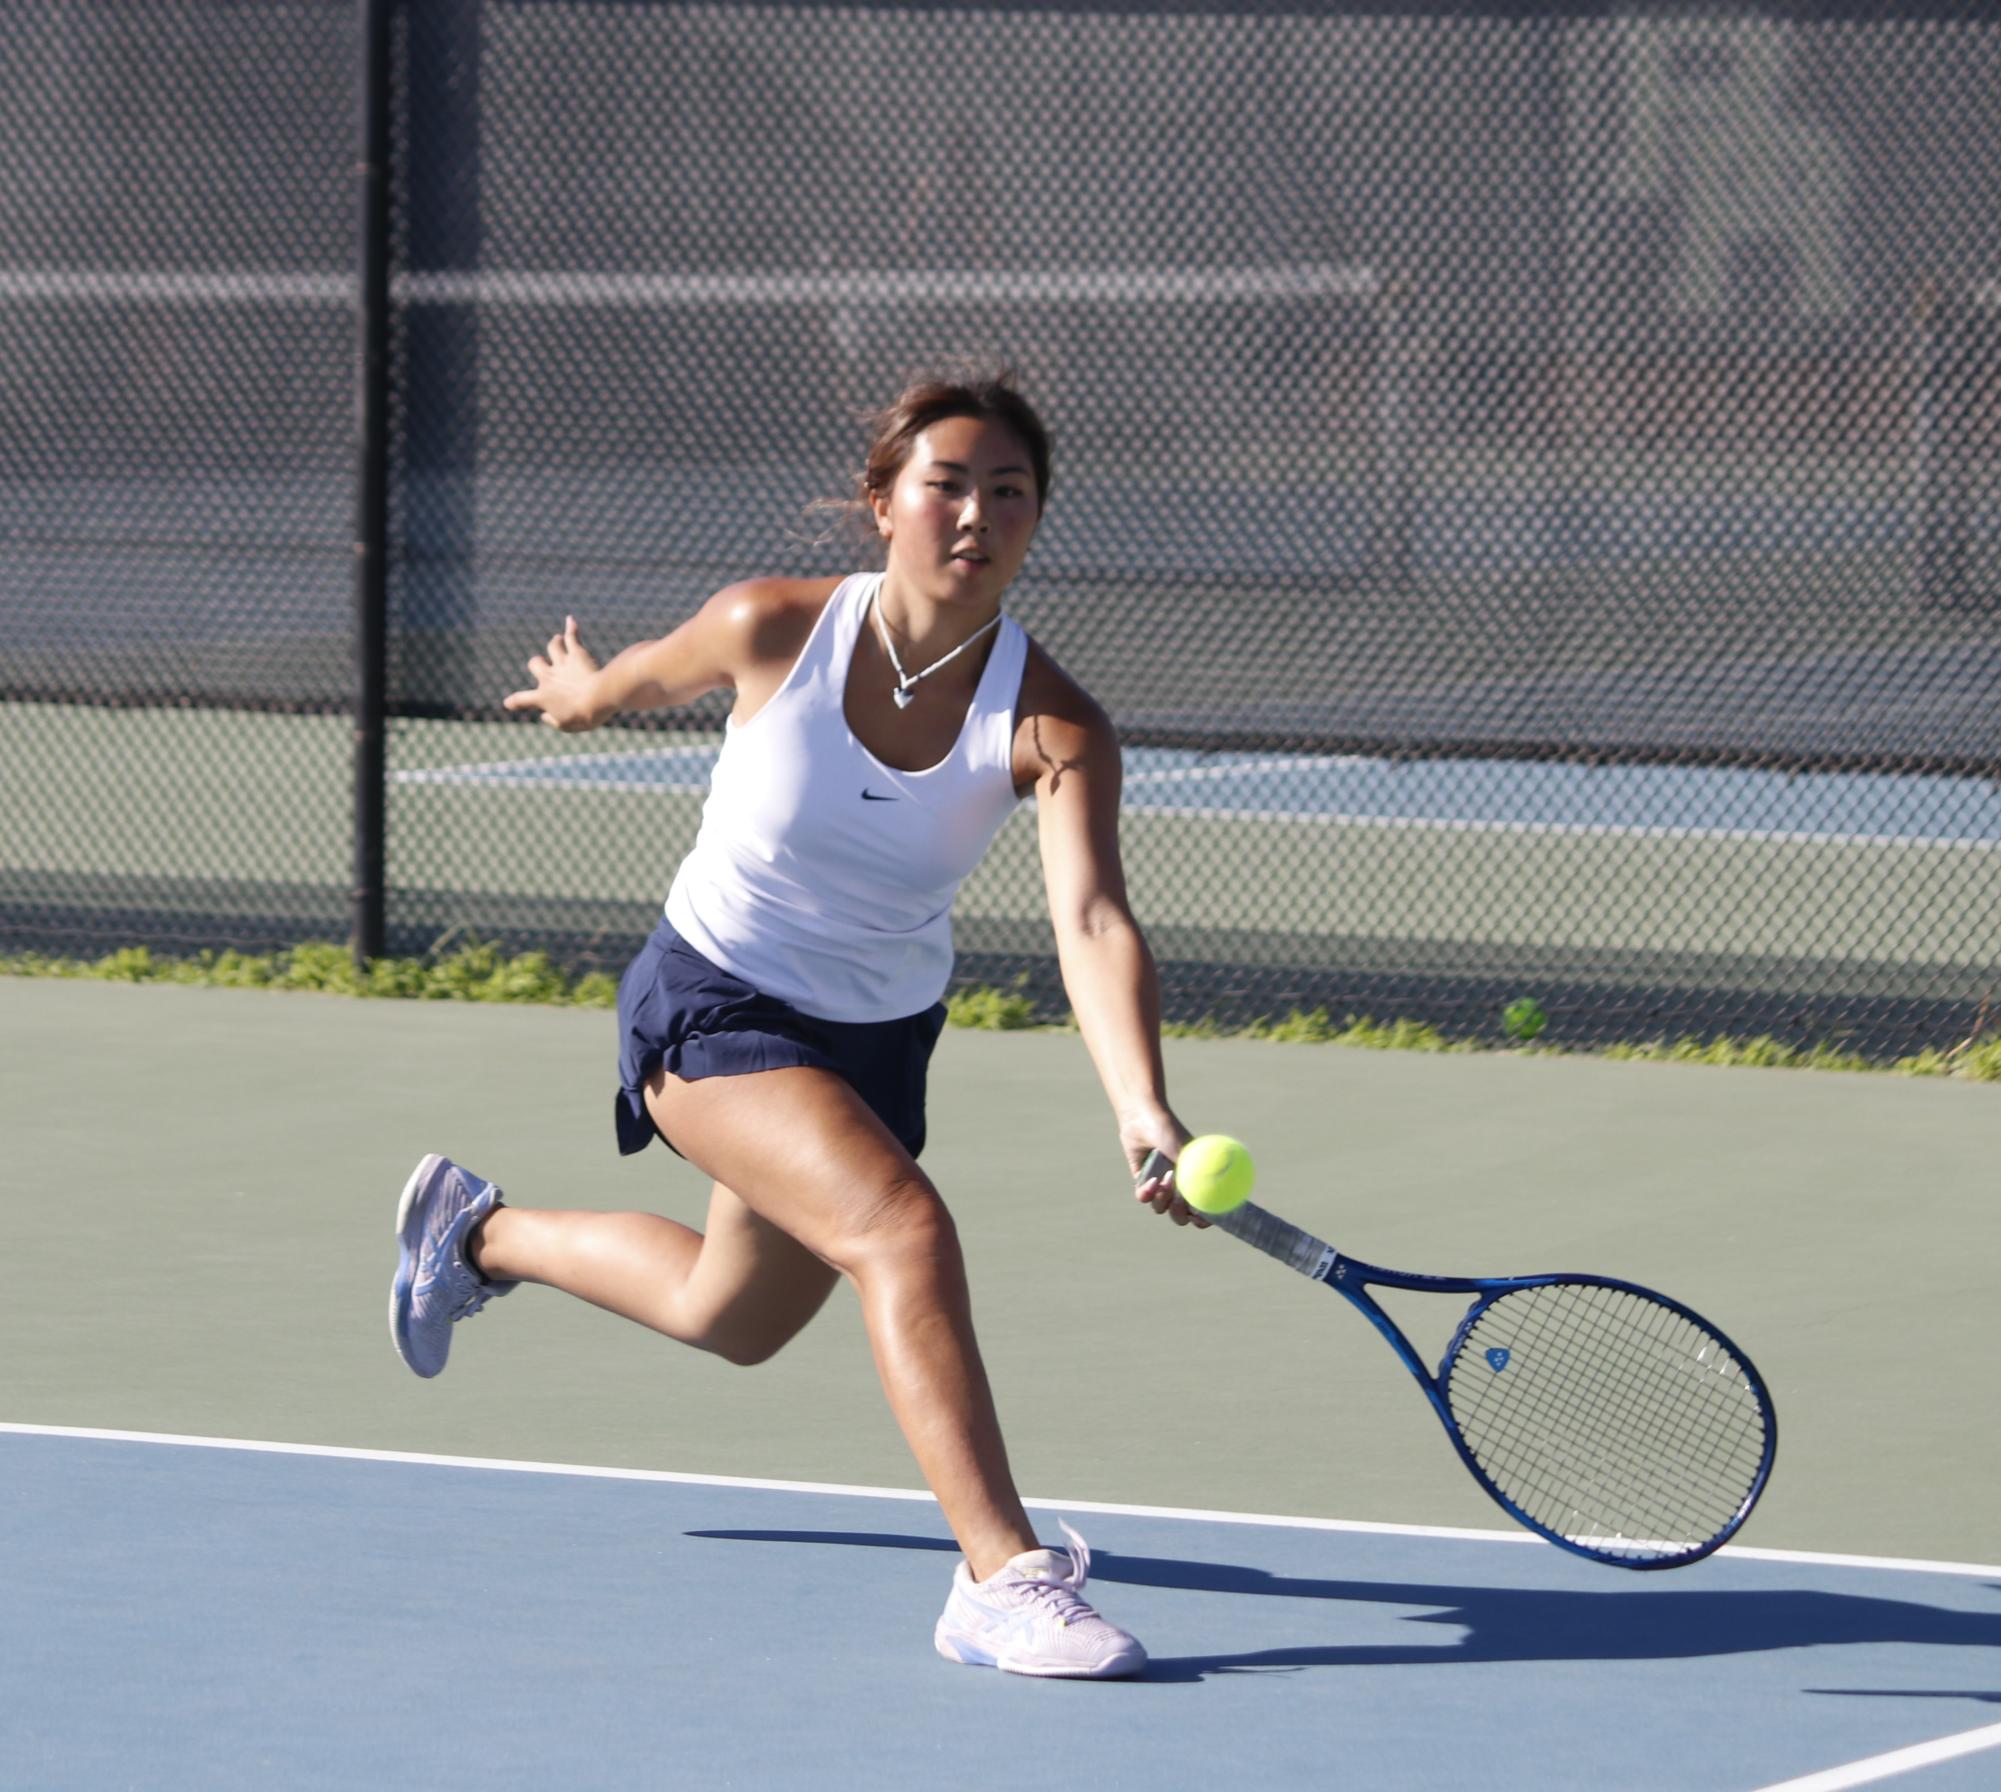 Singles 1 senior Kasandra Uy returns a shot from her opponent with a forehand. “I like putting away my volleys,” Uy said. “That’s just my way of getting points, but sometimes I also do a drop shot because it’s just fun.”